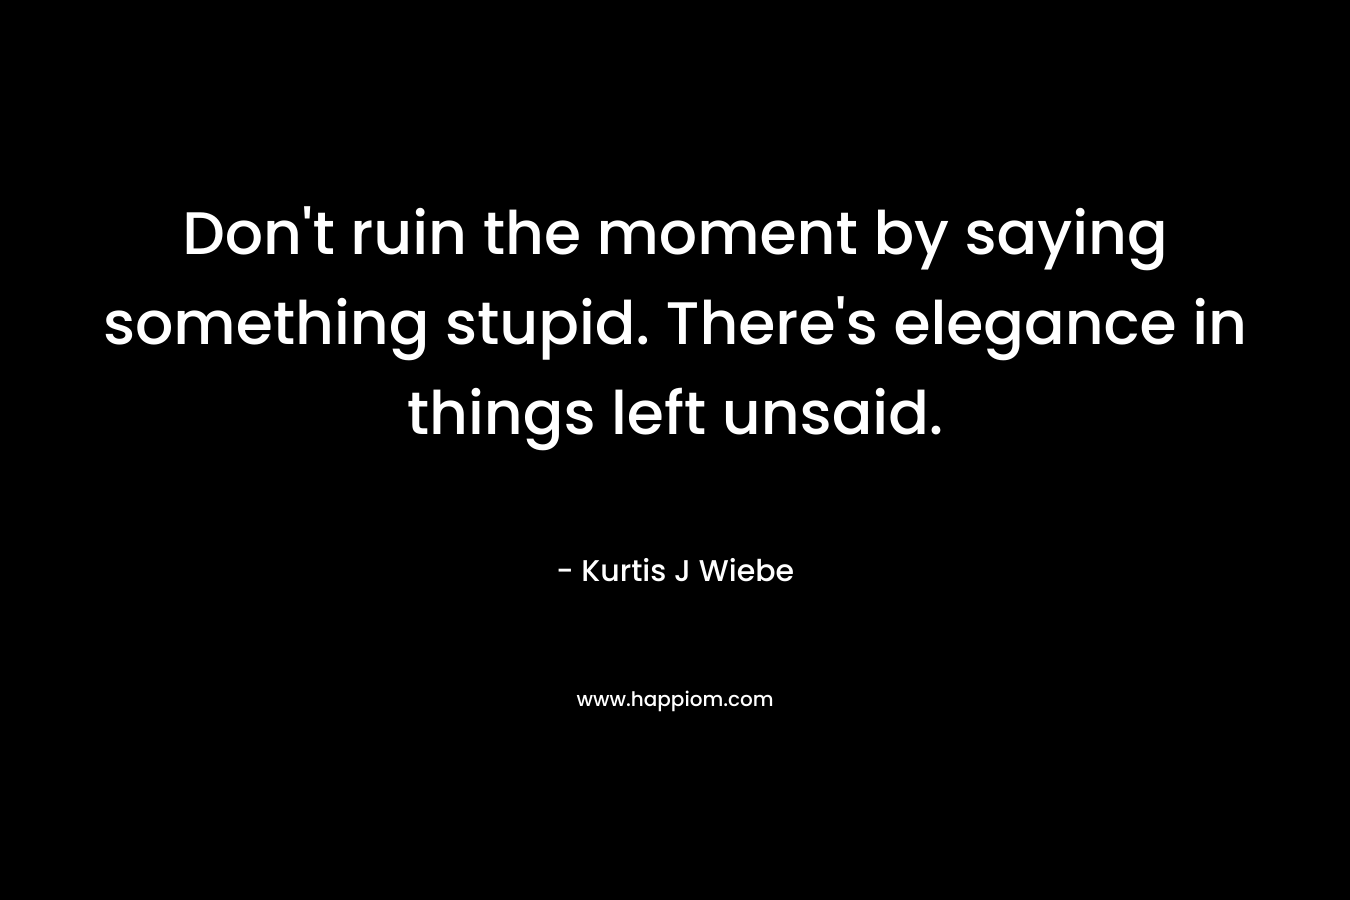 Don’t ruin the moment by saying something stupid. There’s elegance in things left unsaid. – Kurtis J Wiebe